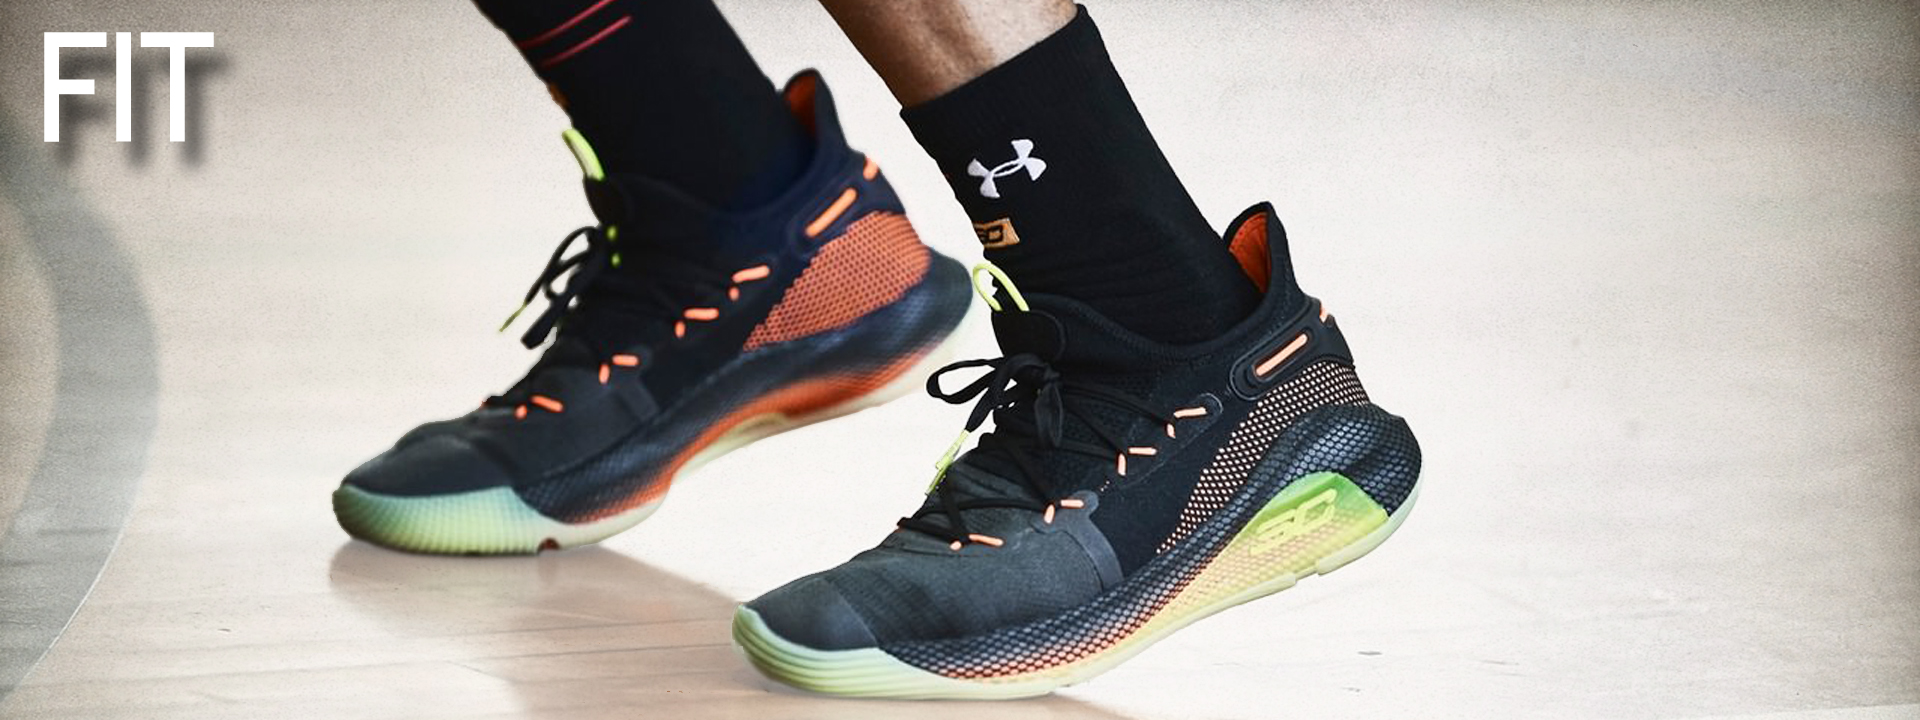 Under Armour Curry 6 Performance Review 